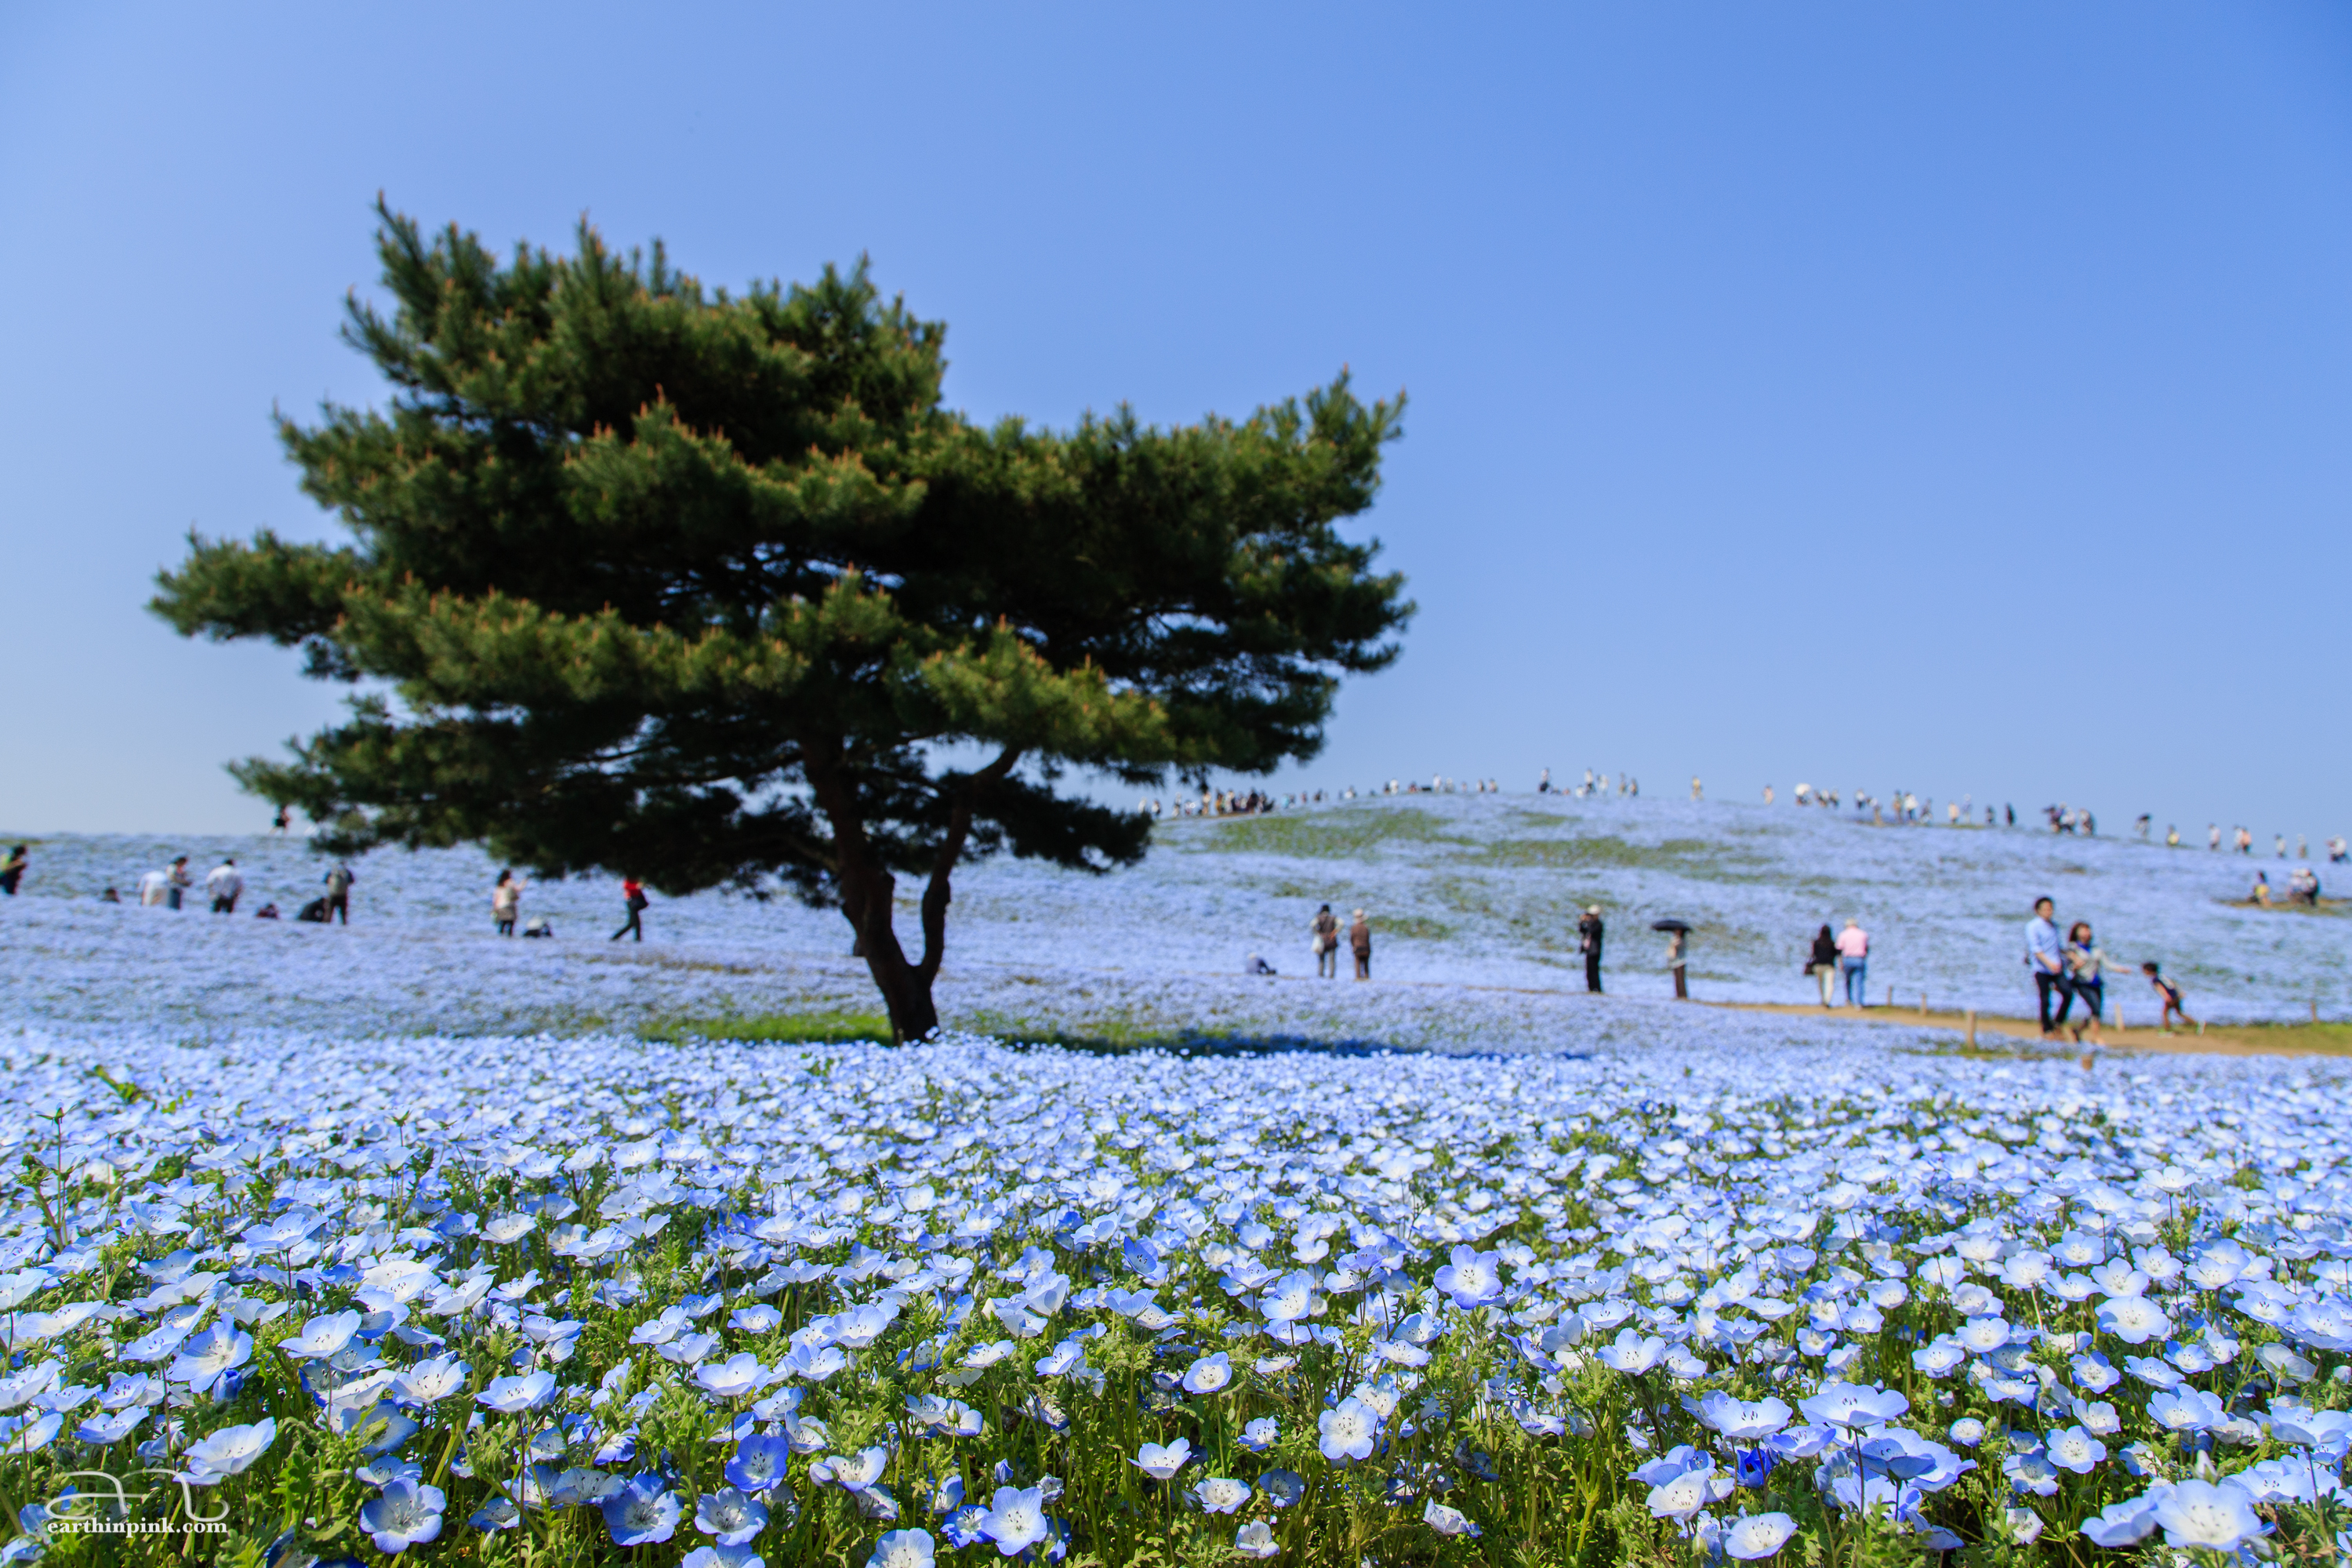 A lonely tree surrounded by a sea of baby blue eyes at Hitachi Seaside park, Ibaraki Prefecture.